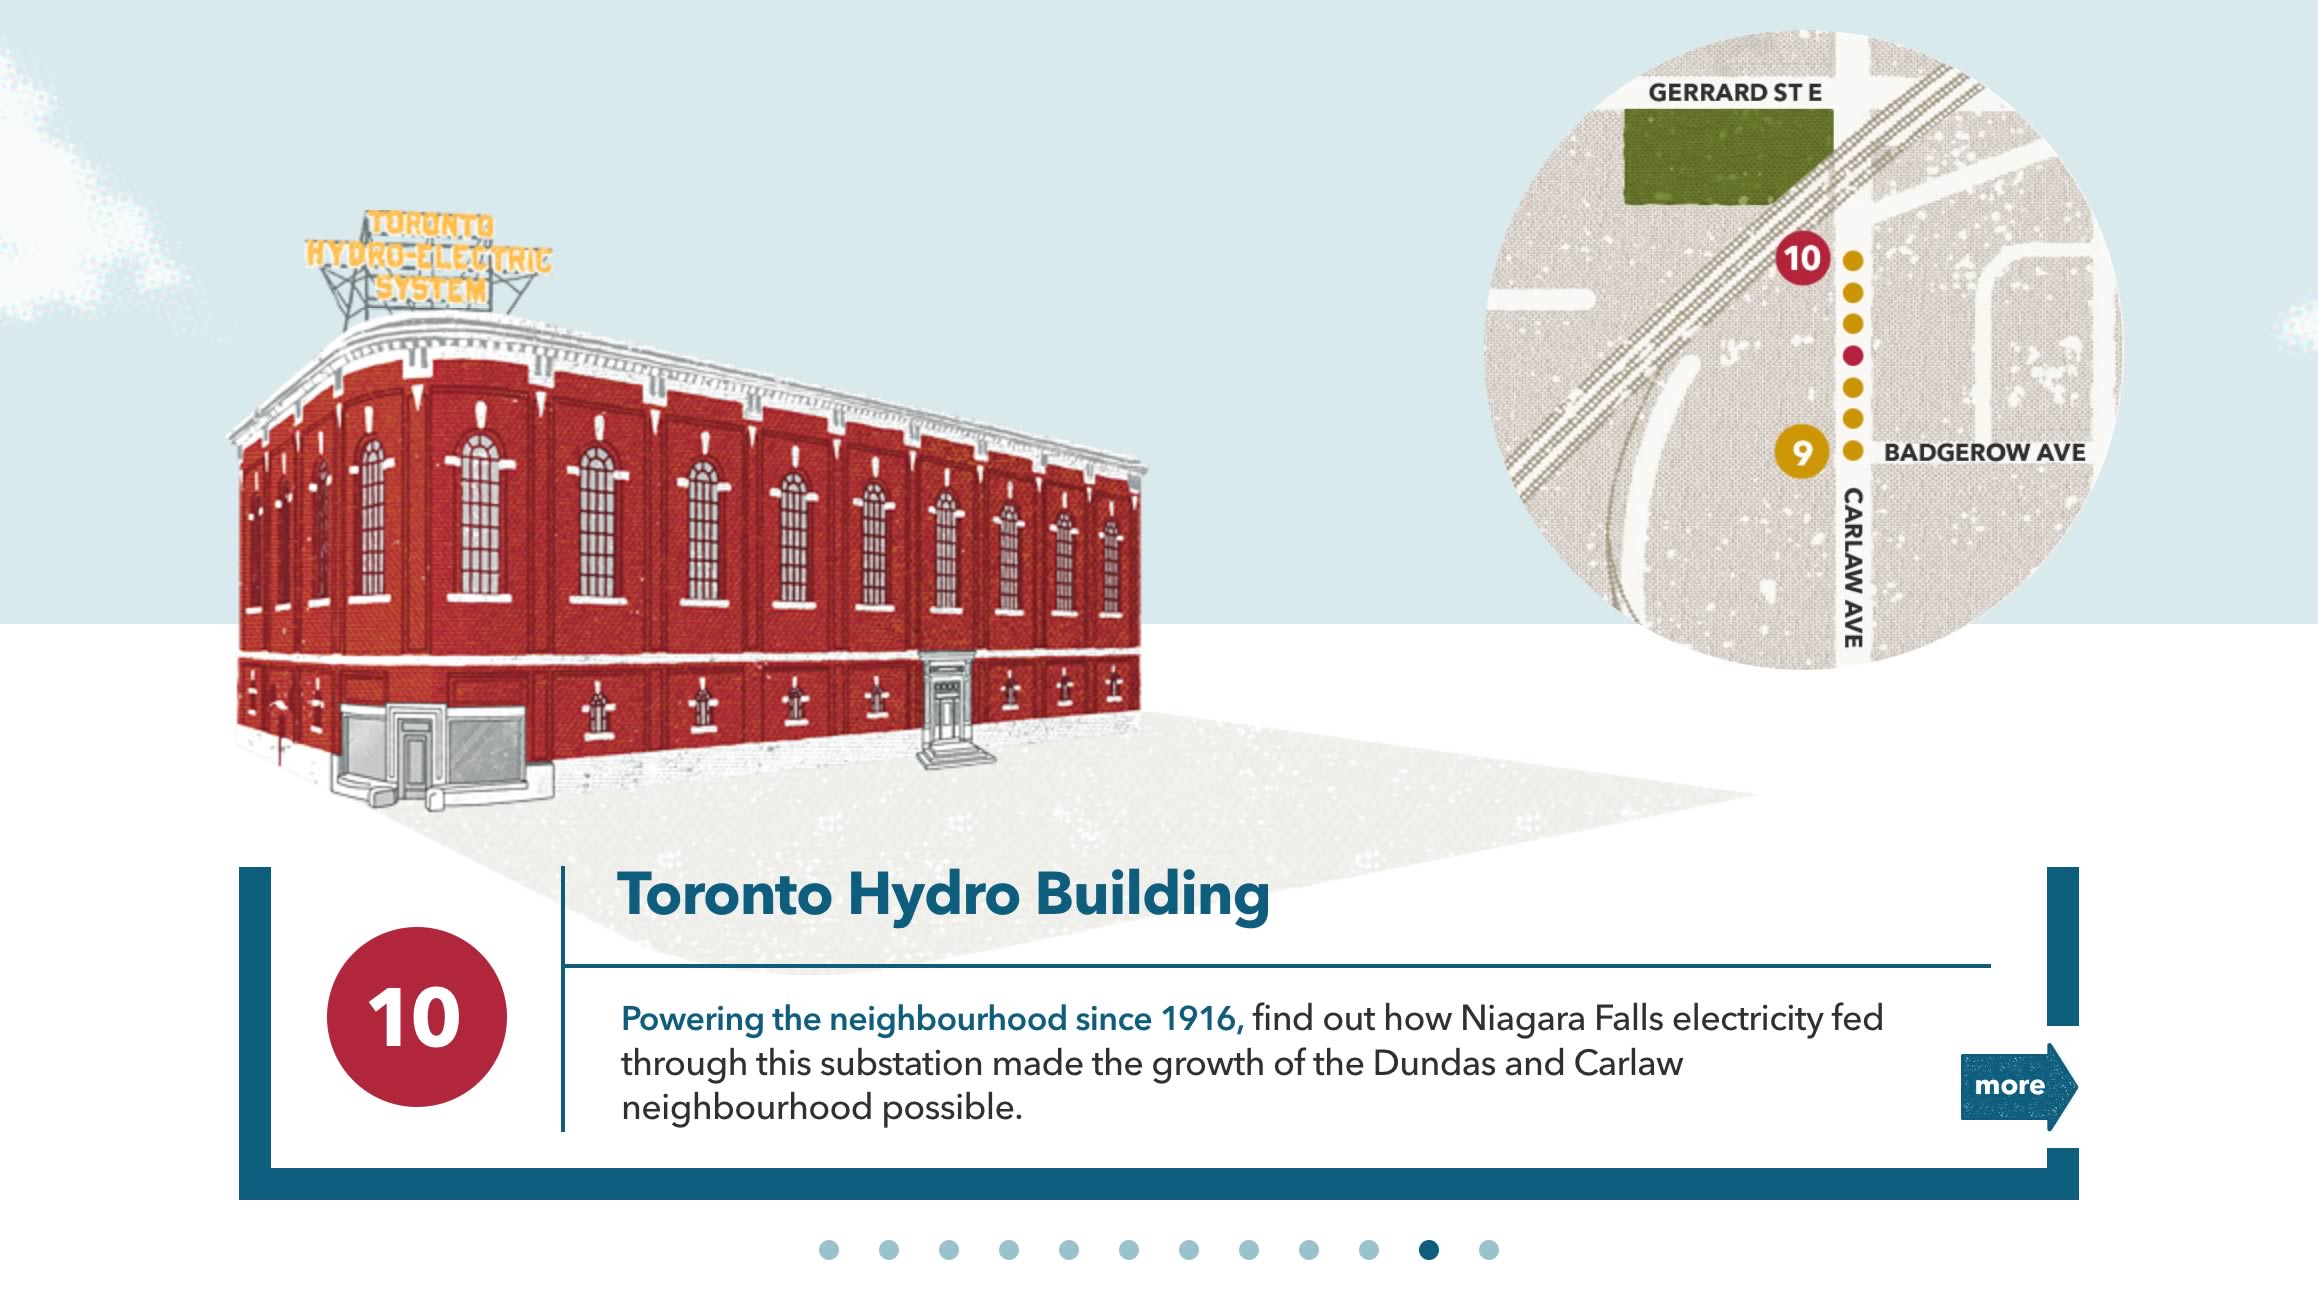 Capture of the homepage tour navigation modal window from the Made in Toronto tour/website ('Toronto Hydro Building' stop displayed)